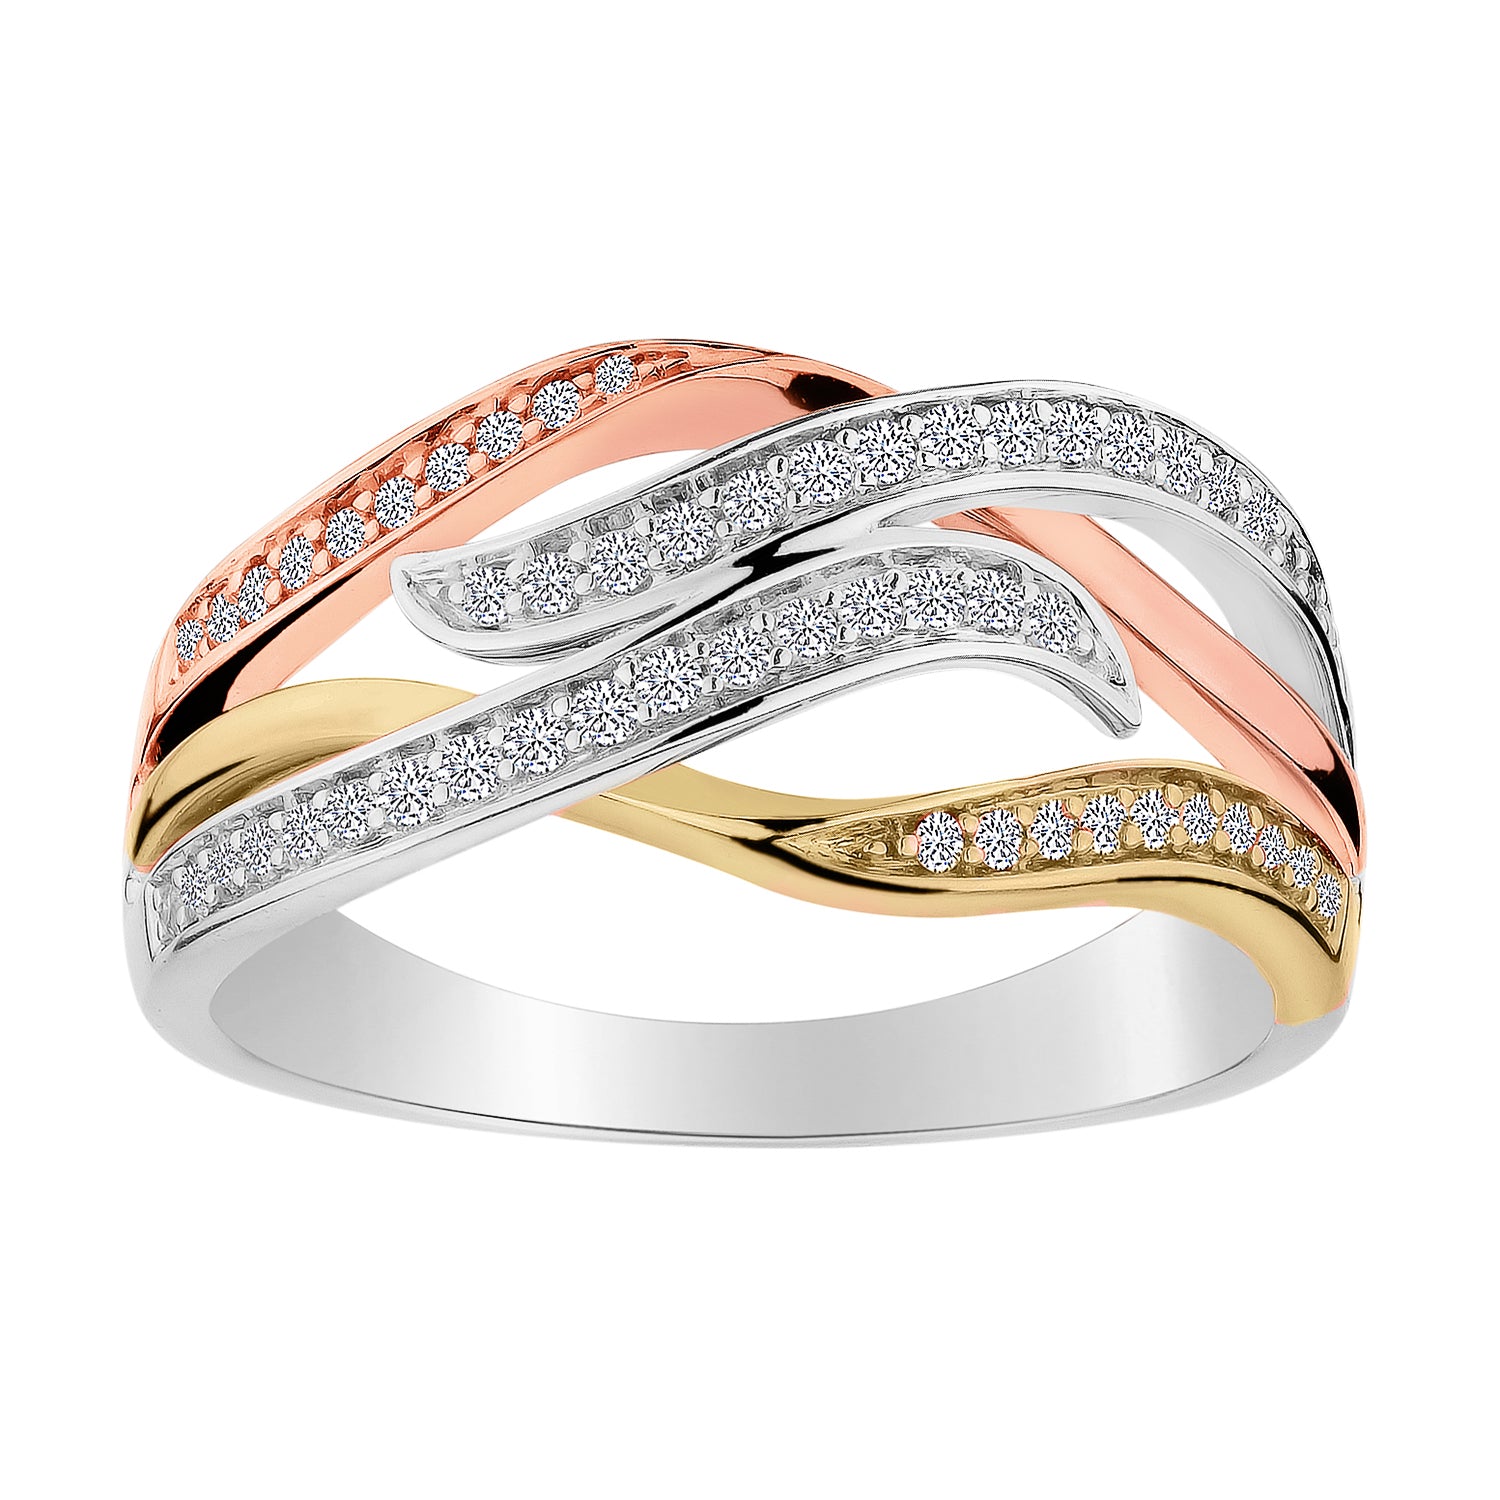 .25 CARAT DIAMOND RING, 10kt WHITE, YELLOW AND ROSE GOLD (TRI-COLOUR). Fashion Rings - Griffin Jewellery Designs